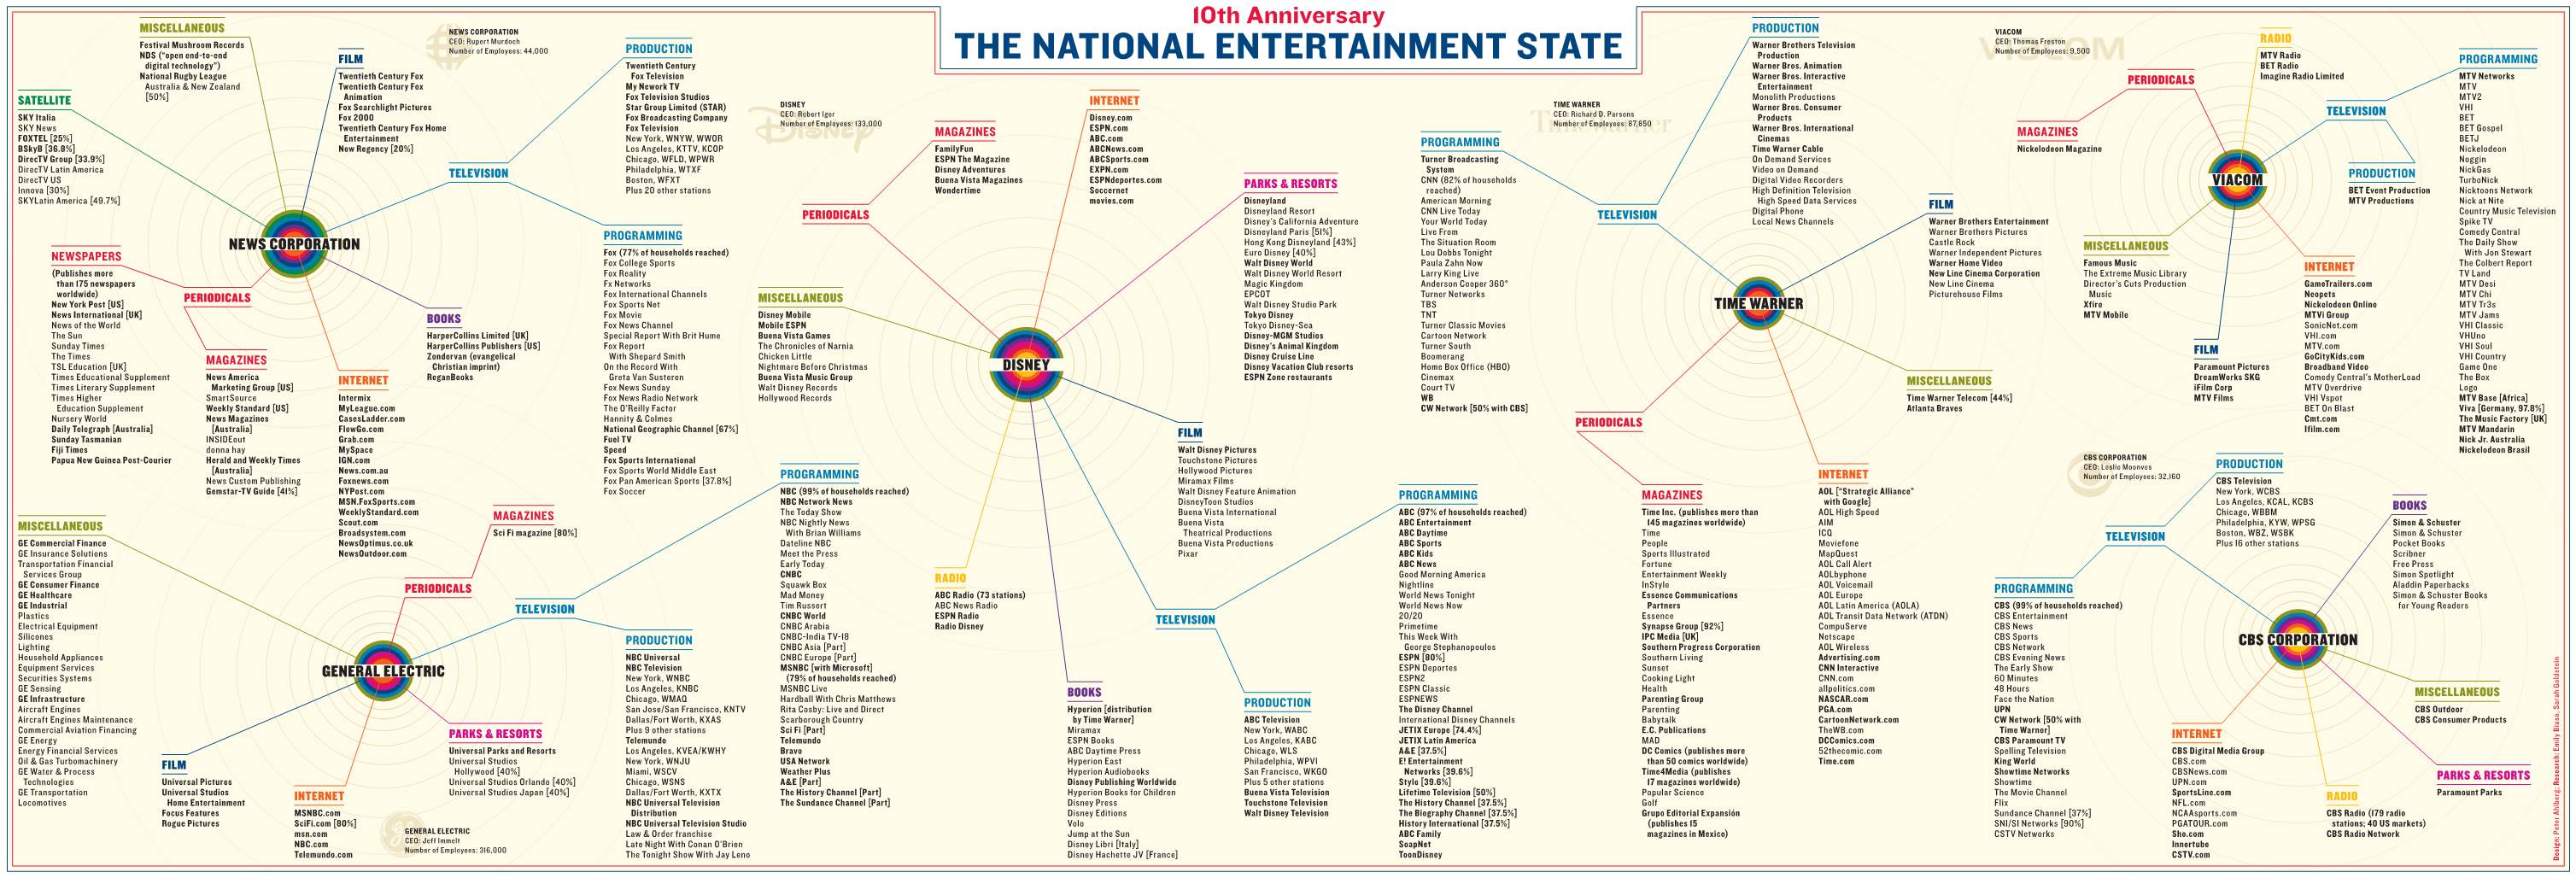 The Nation Entertainment Chart